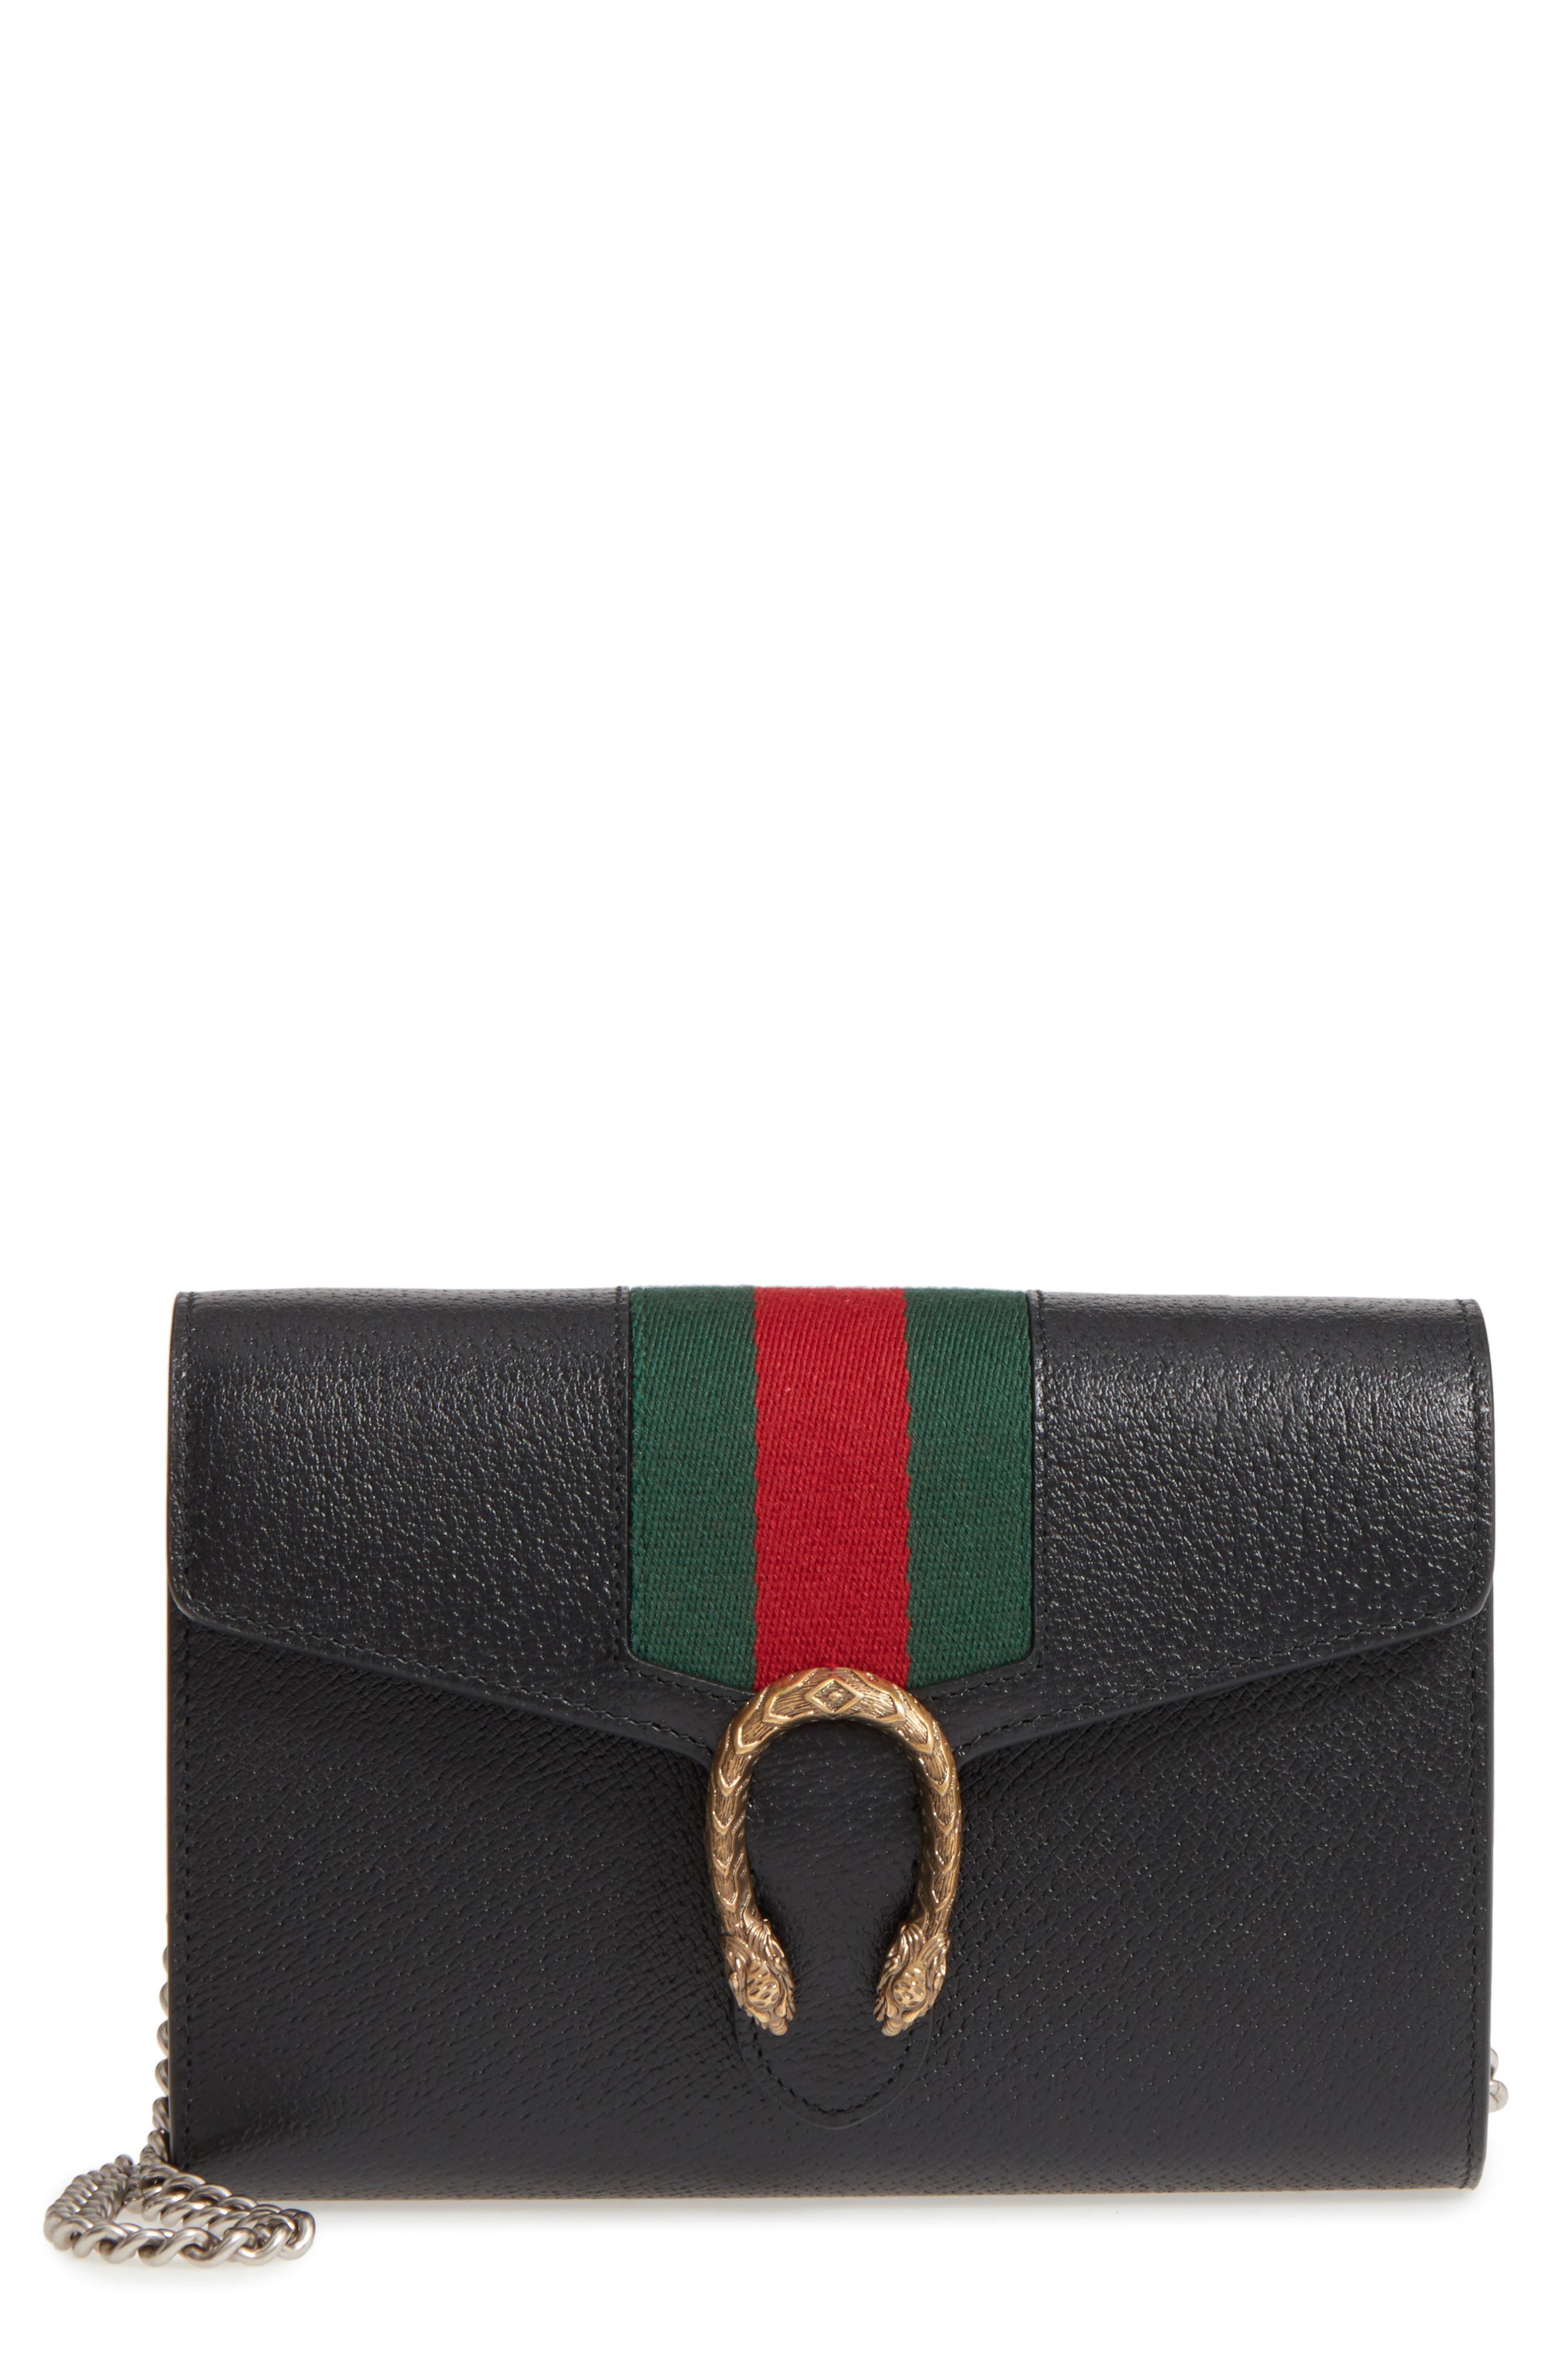 gucci wallet on chain red